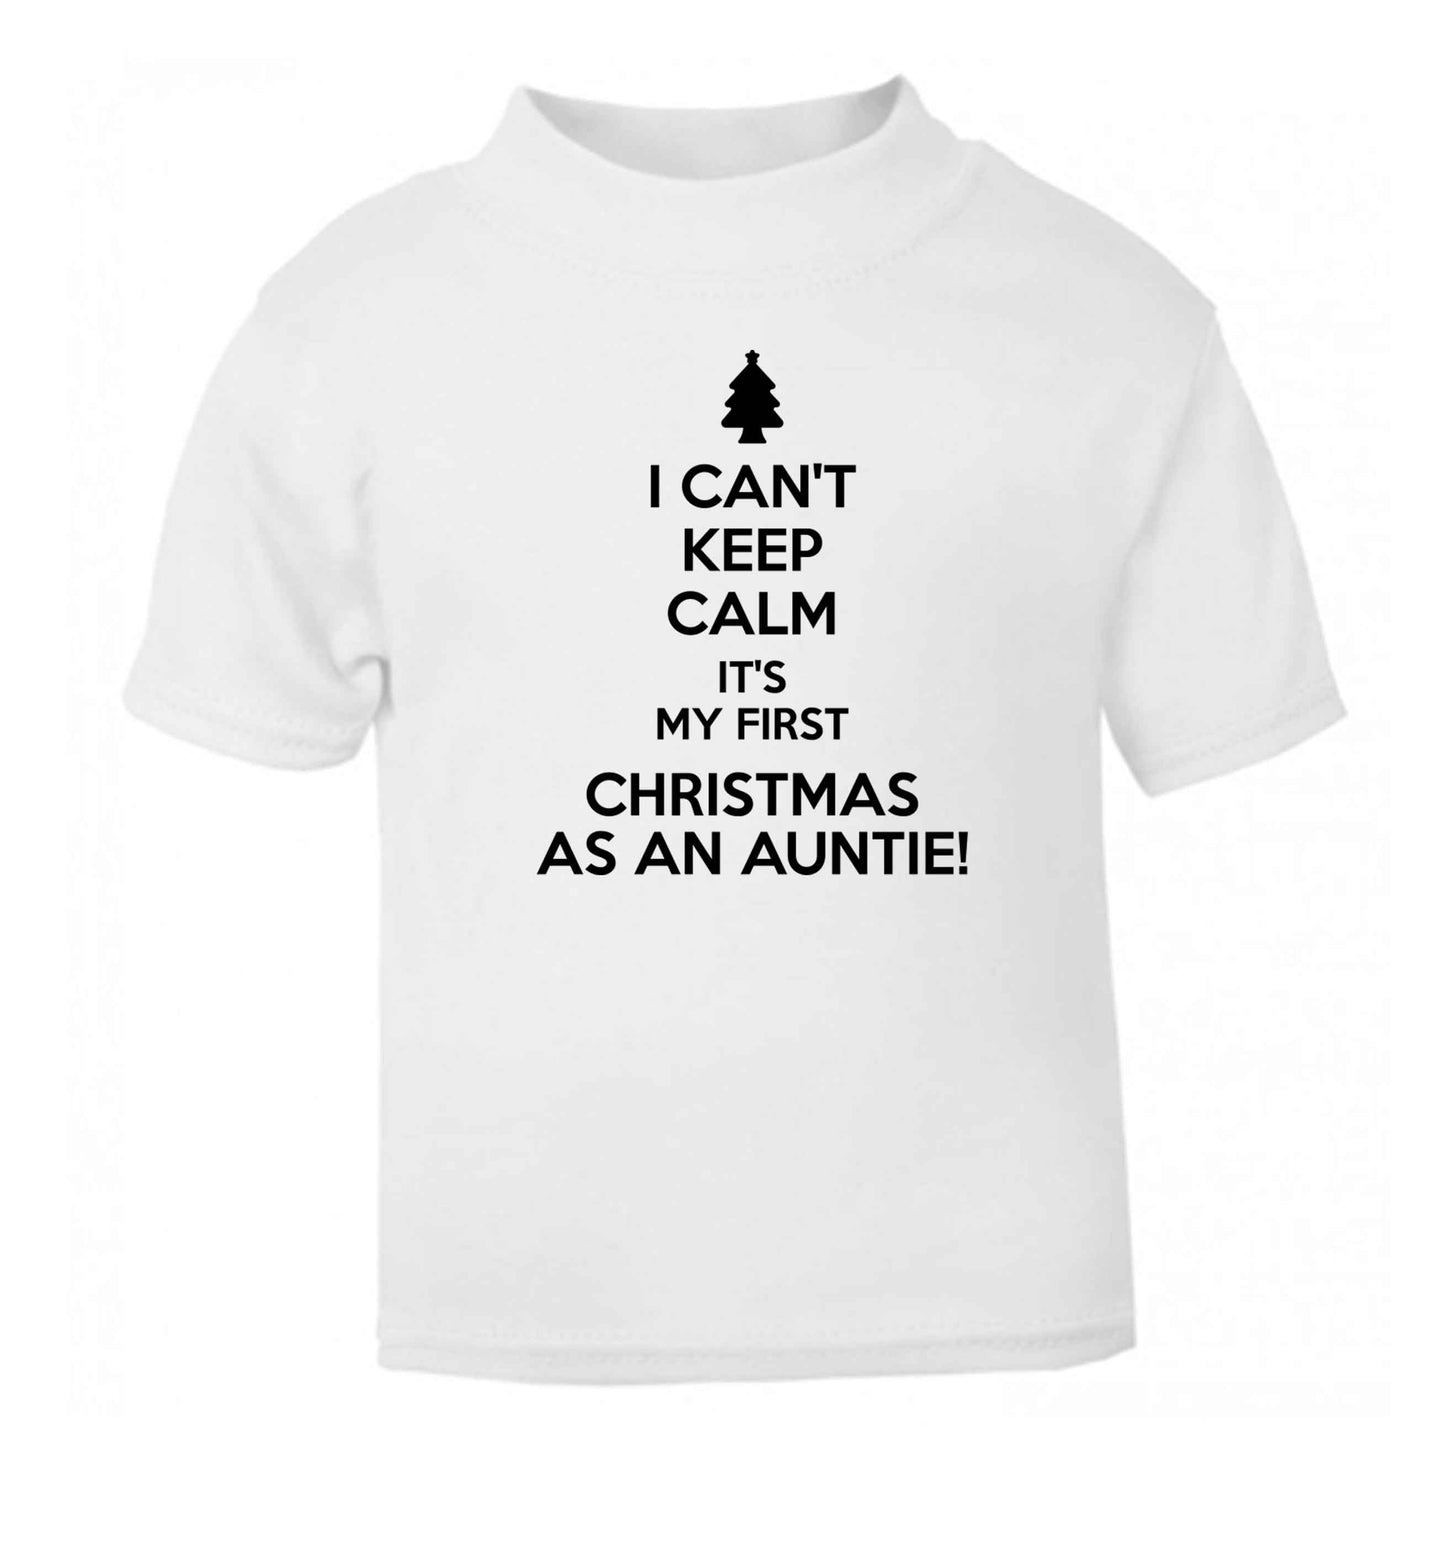 I can't keep calm it's my first Christmas as an auntie! white Baby Toddler Tshirt 2 Years